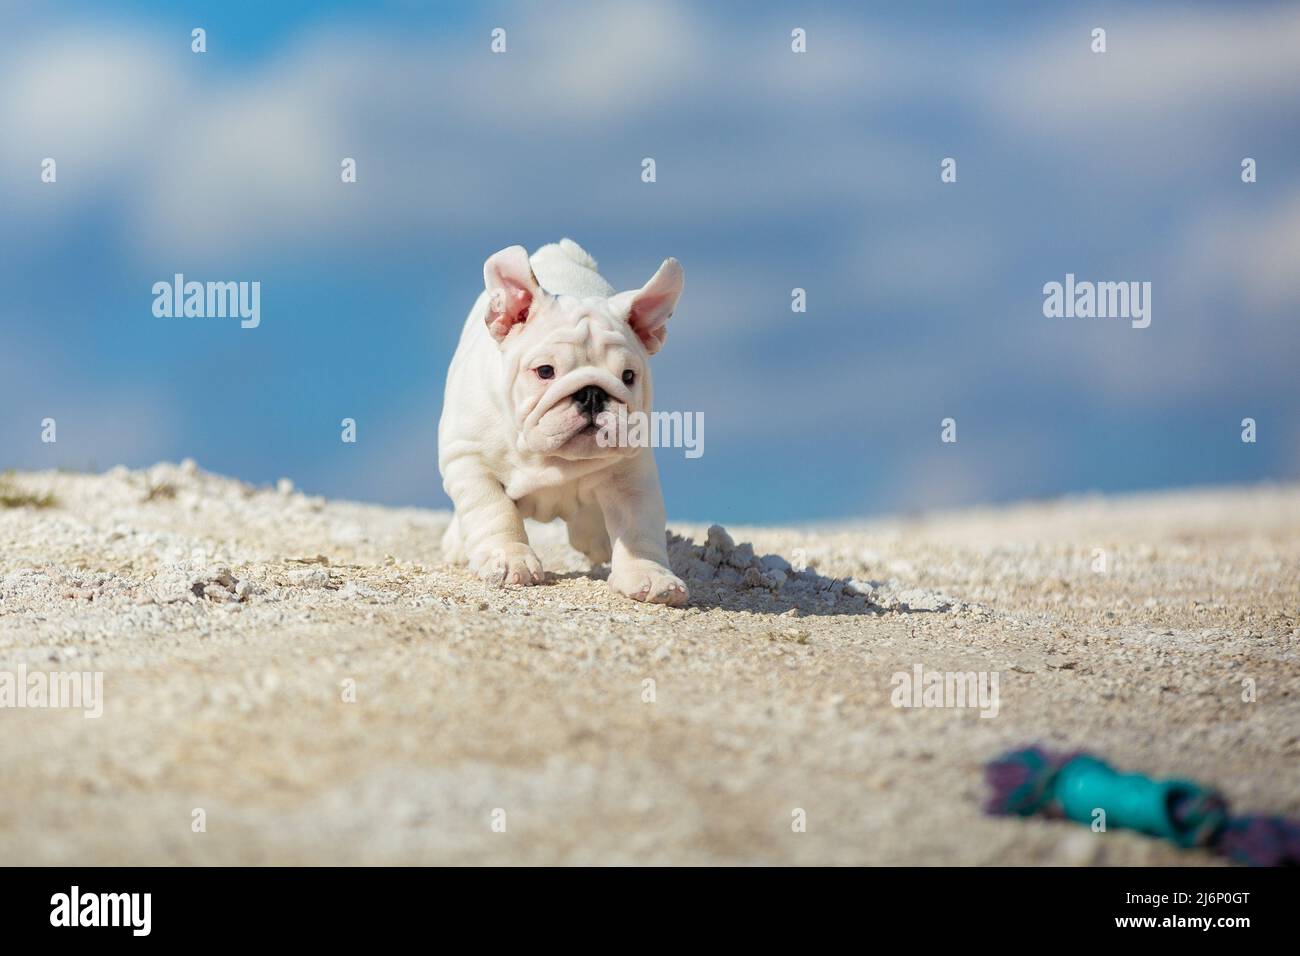 Gorgeous white English Bulldog puppy running towards the toy against a bright blue sky Stock Photo